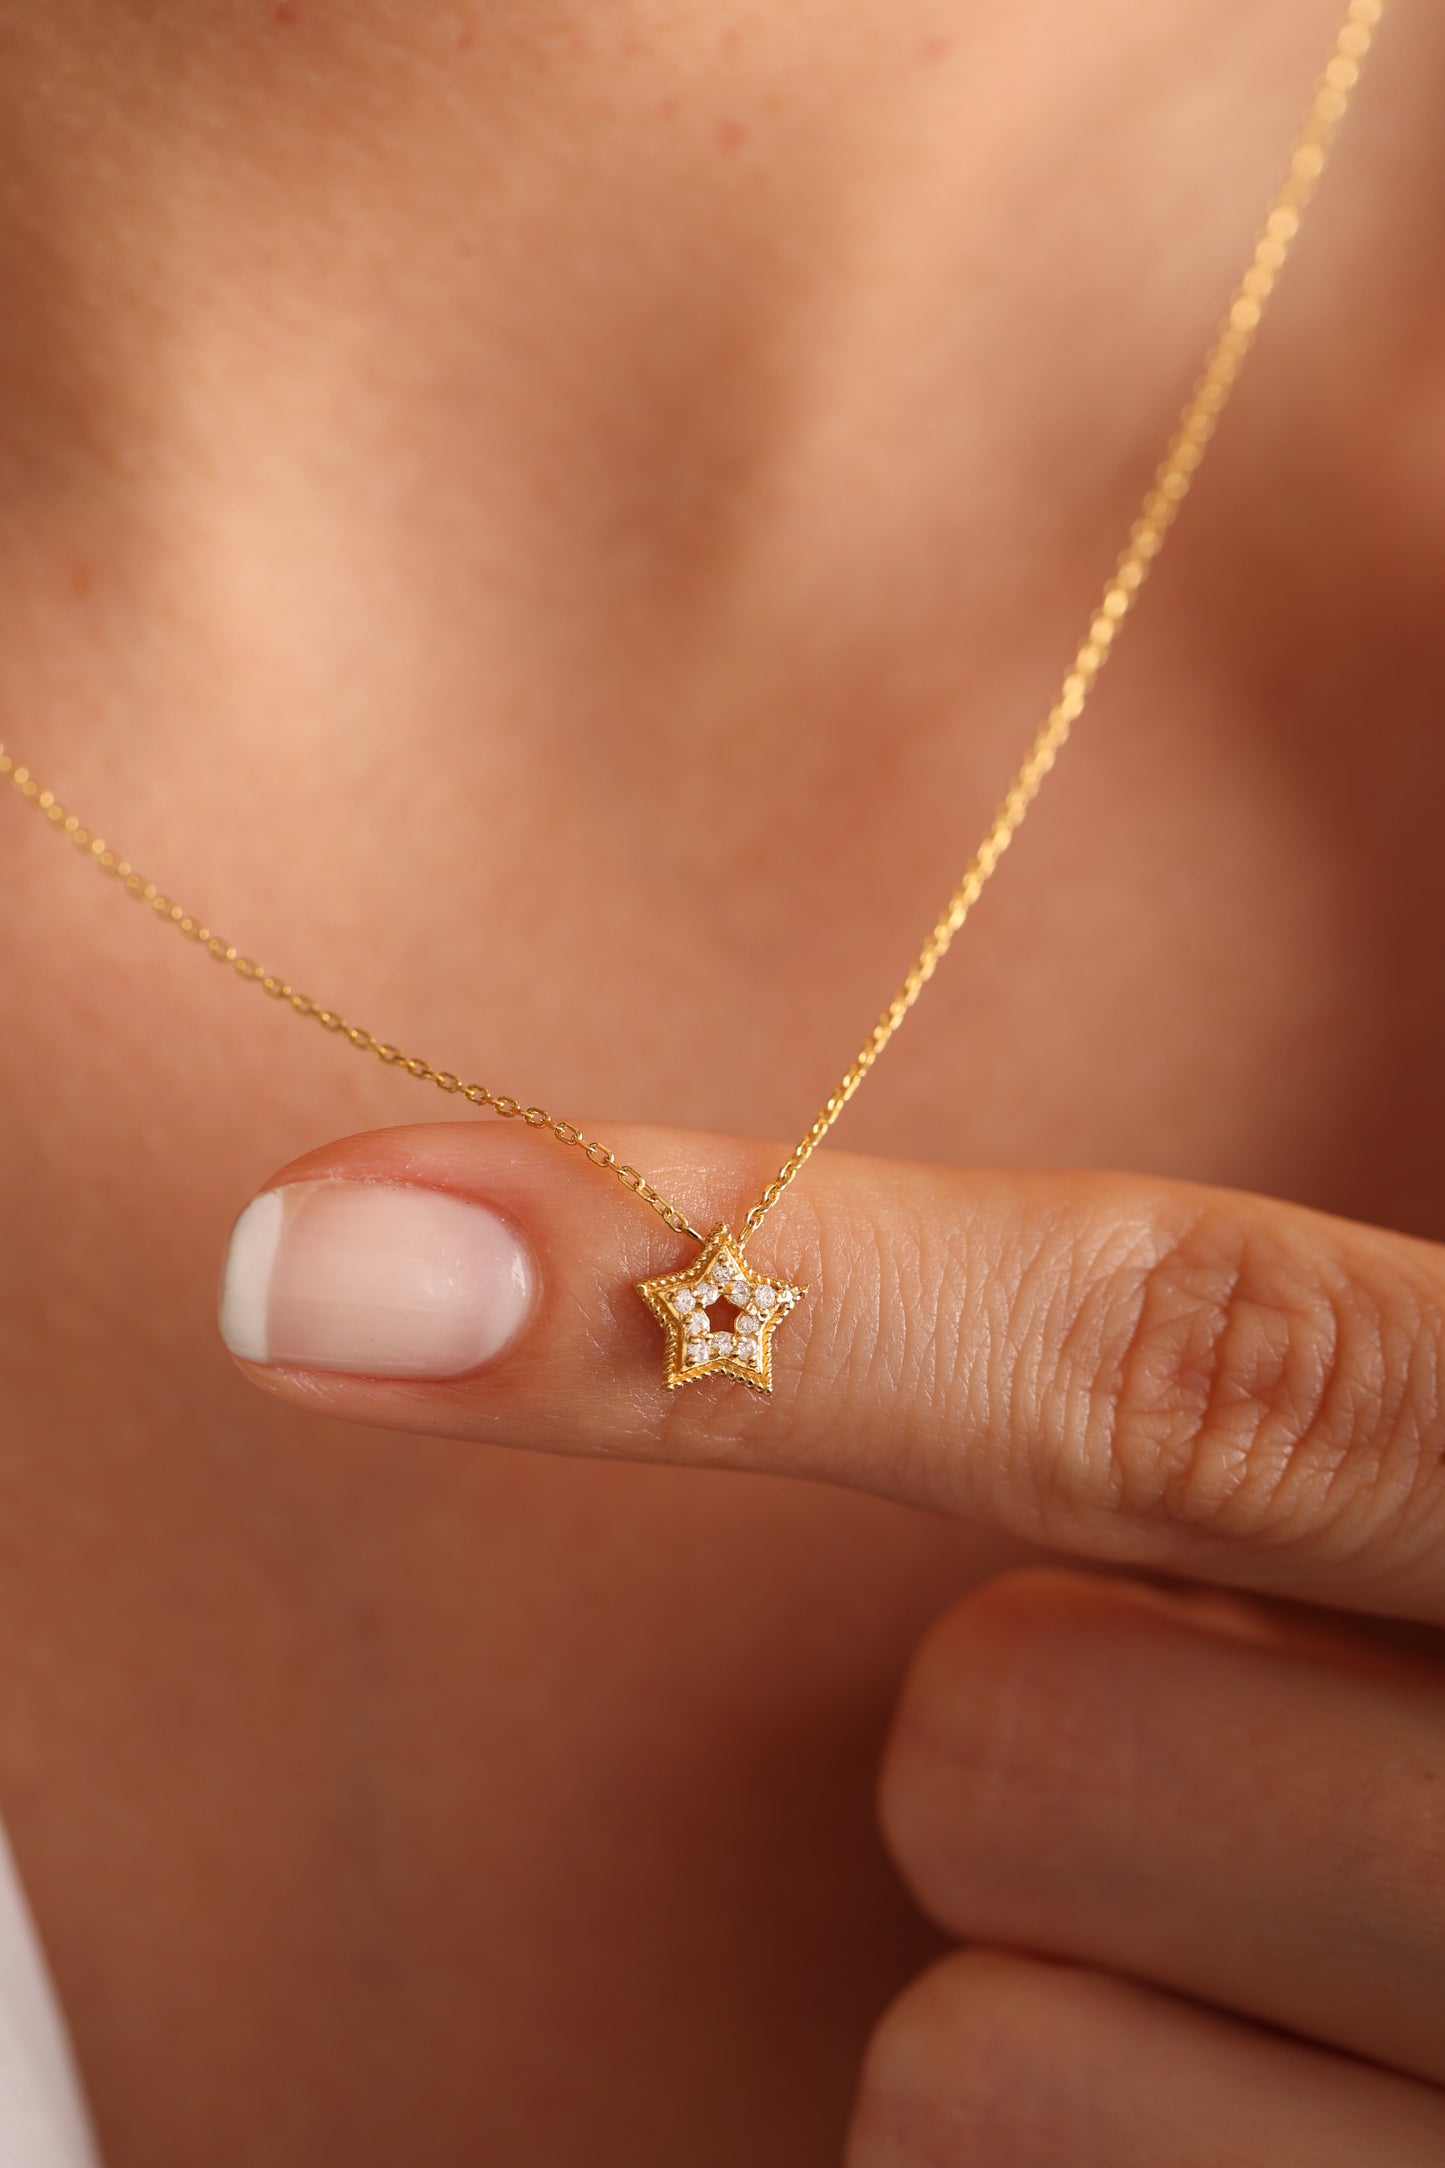 star shaped with stones necklace